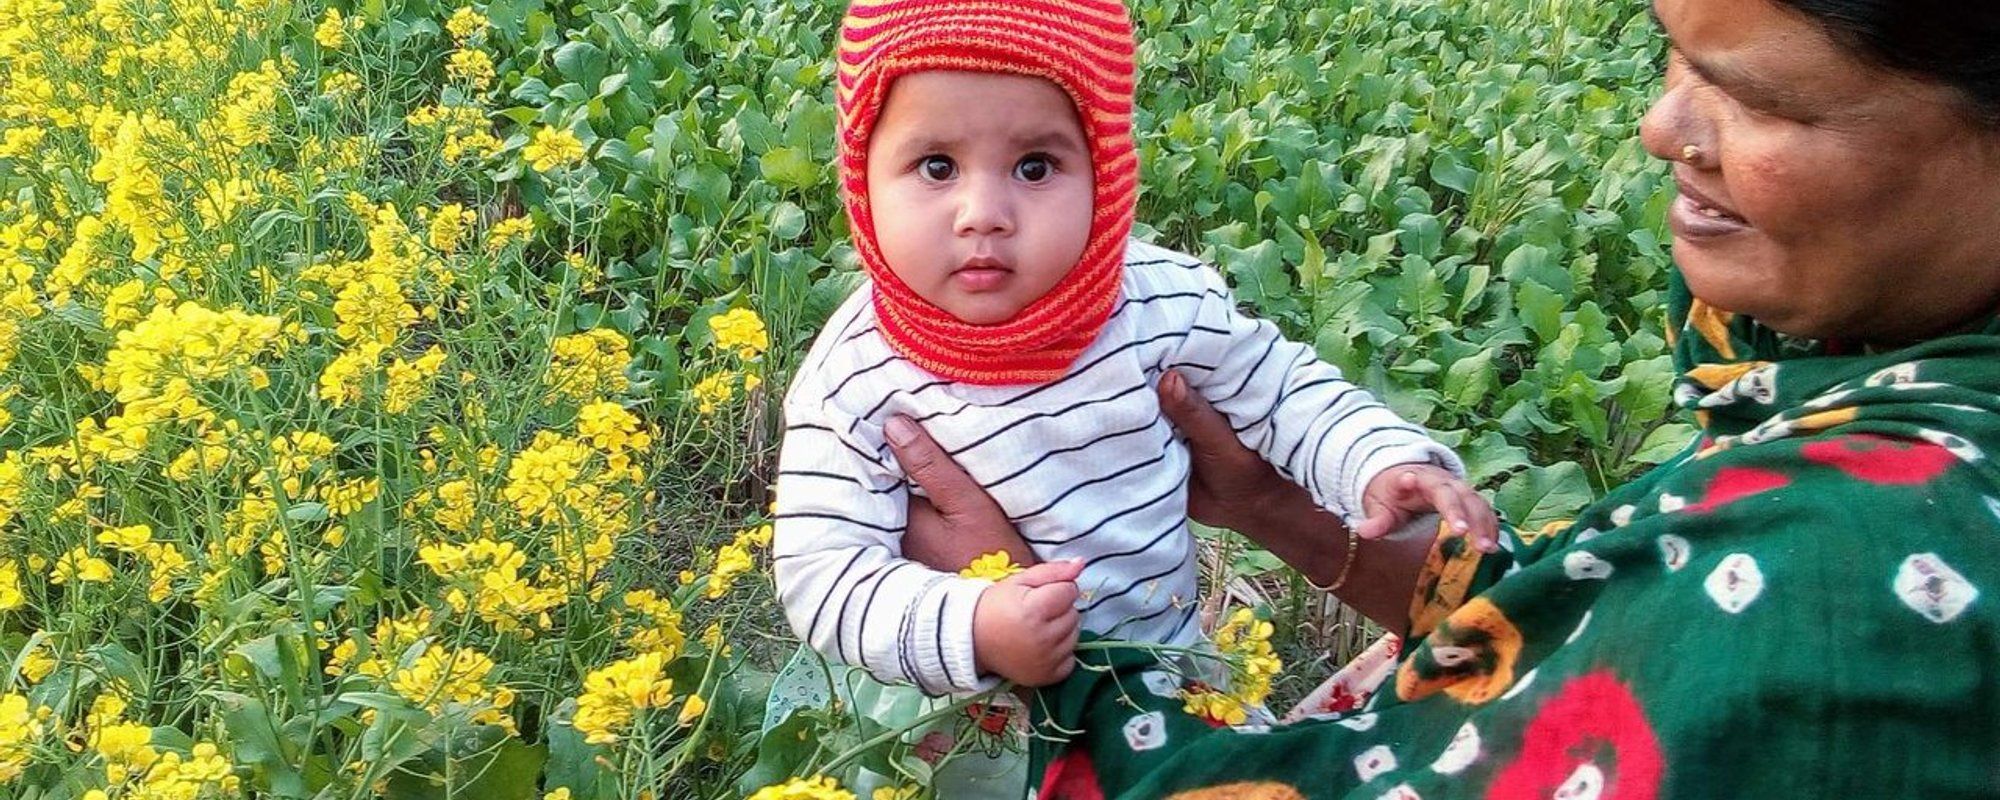 One day with my daughter in the mustard field in our village